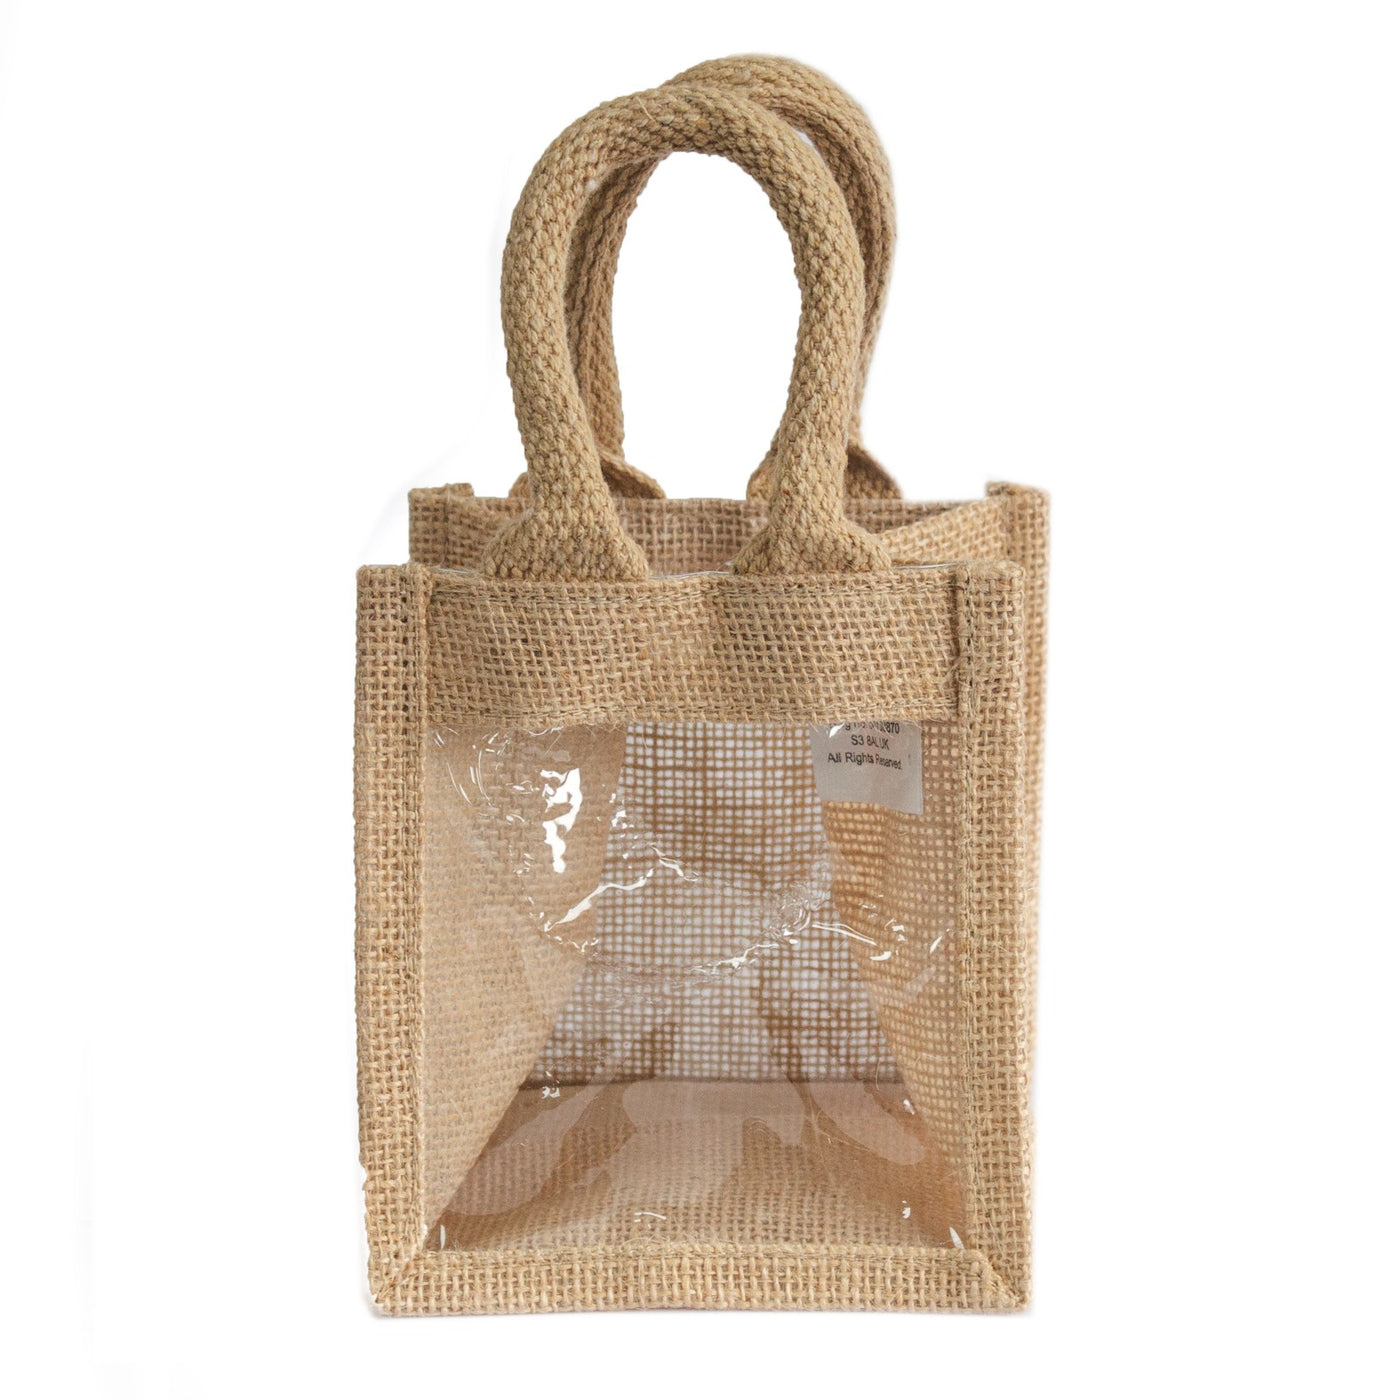 Natural Jute Single Gift Bag With Clear Window And Handle.